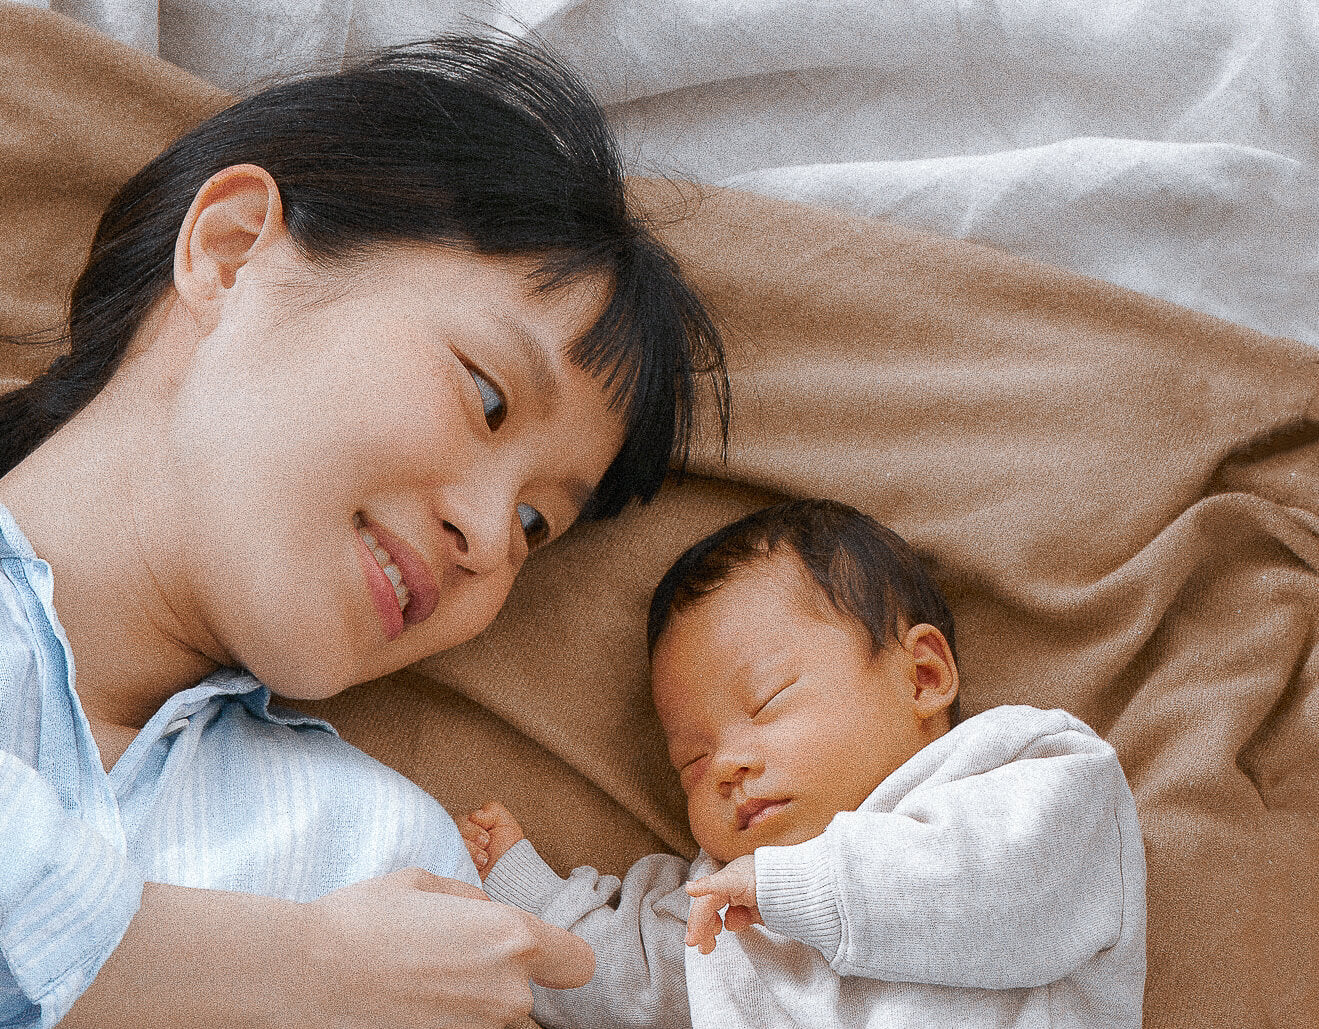 Asian women laying next to her baby on a bed